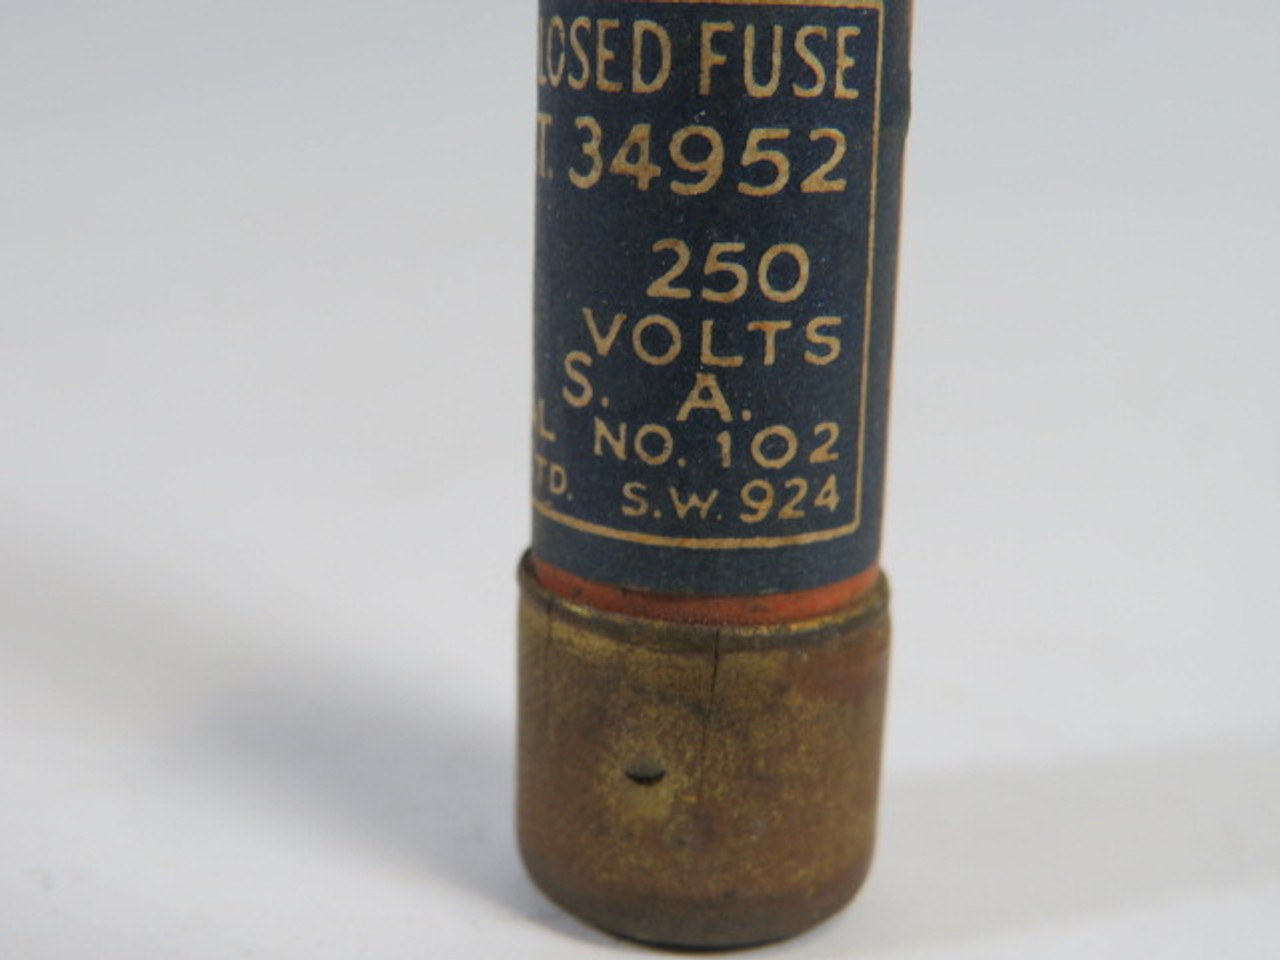 General Electric 34952 Fuse 10A 250V USED